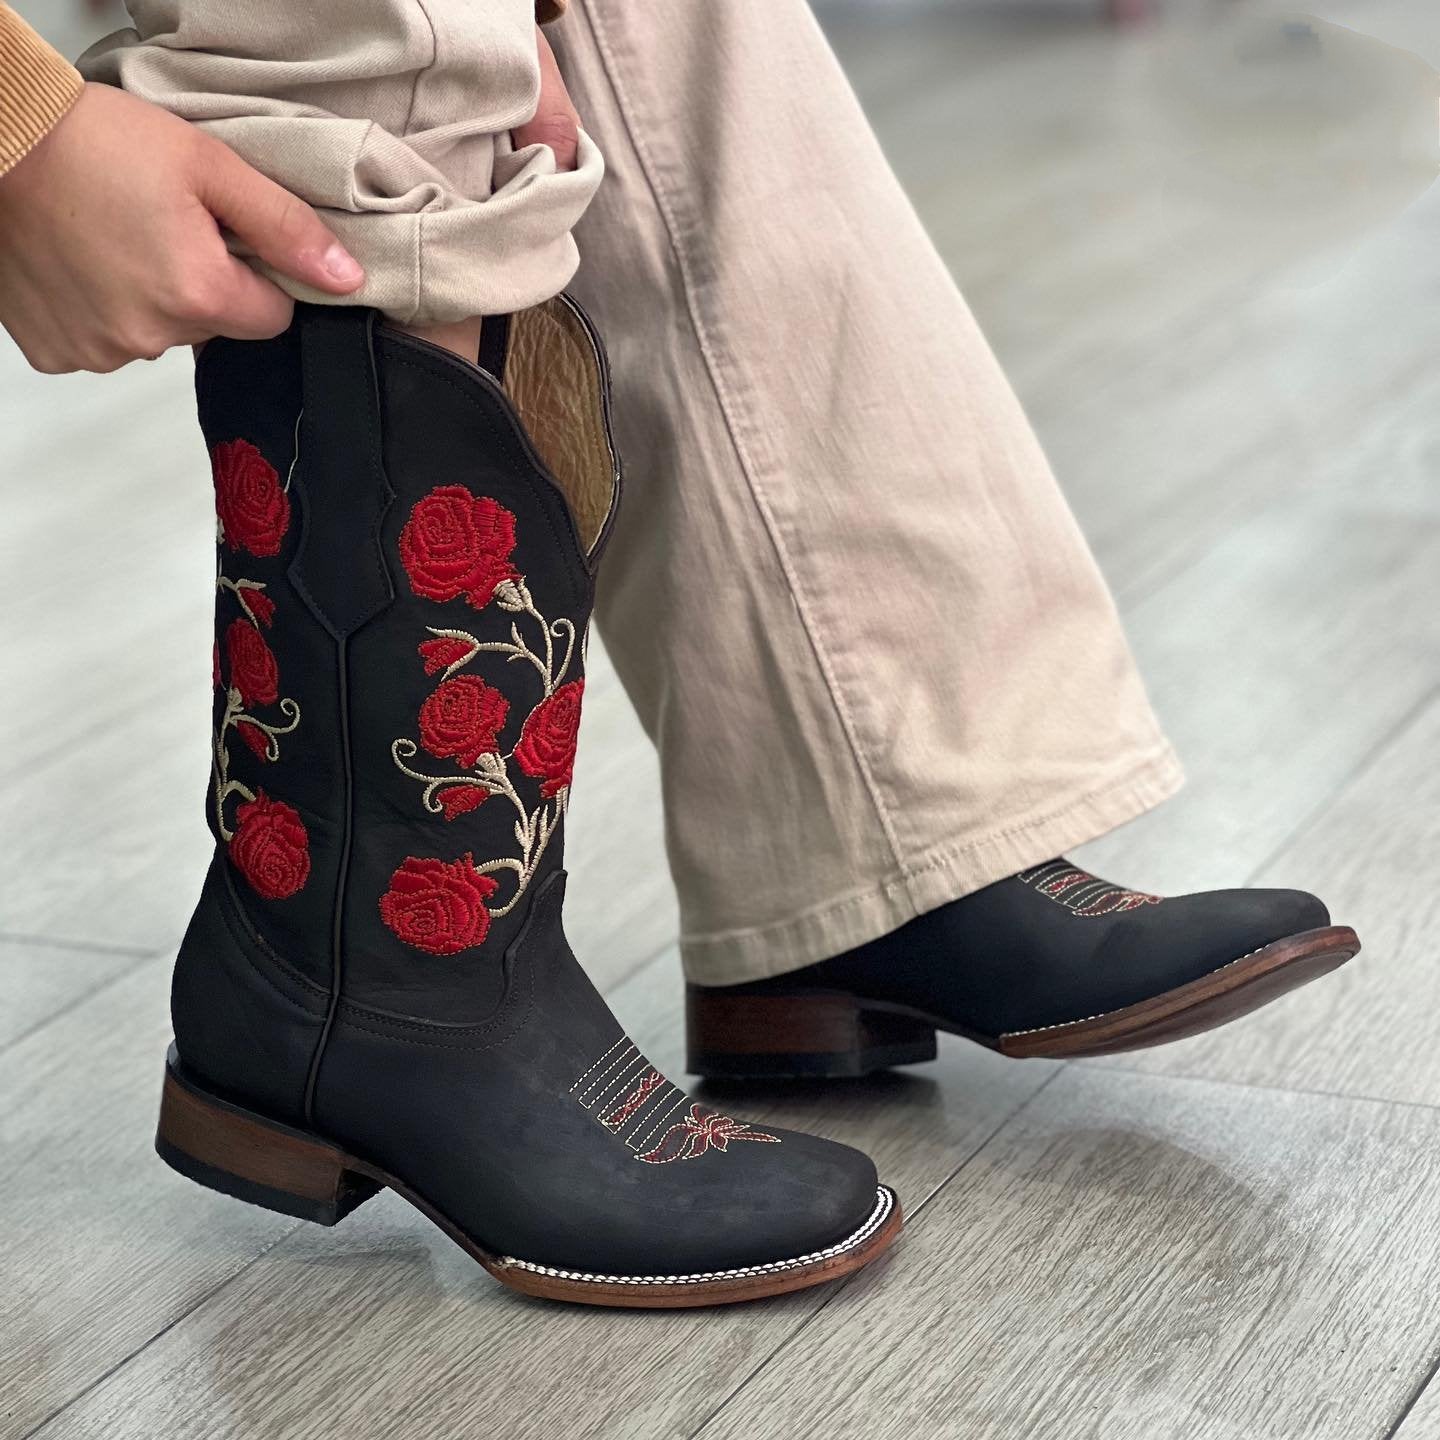 Women's Embroidered Rose Boots